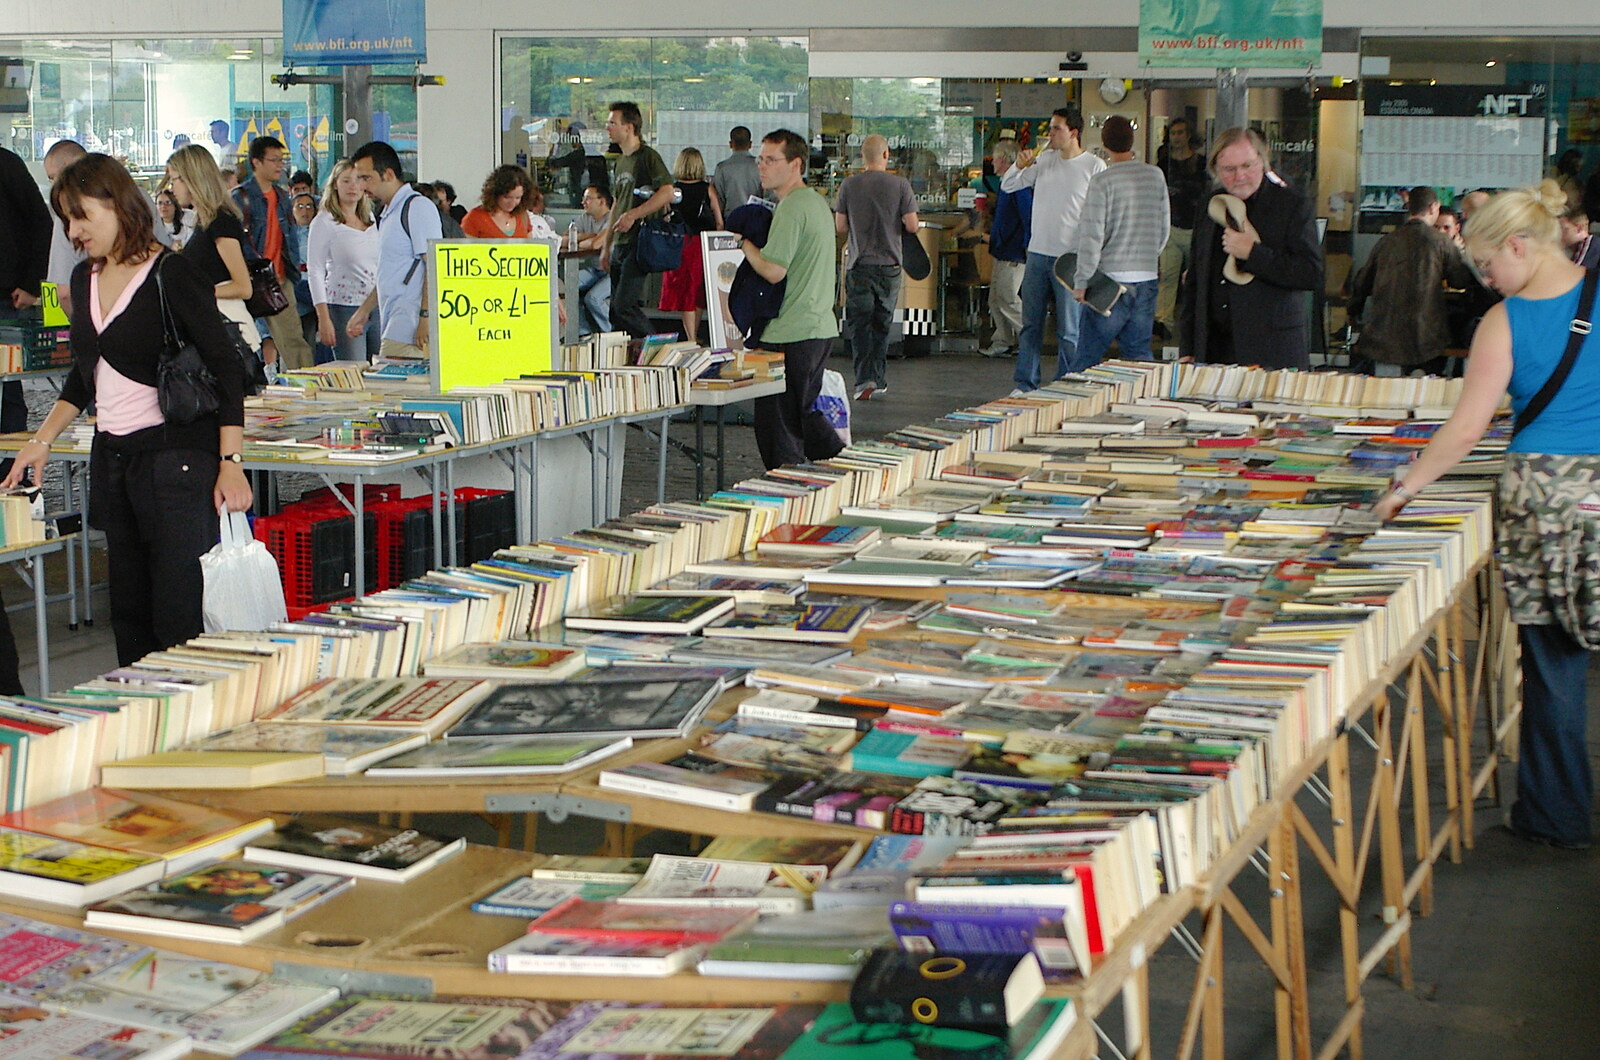 A second-hand book fair under Waterloo Bridge from Borough Market and North Clapham Tapas, London - 23rd July 2005